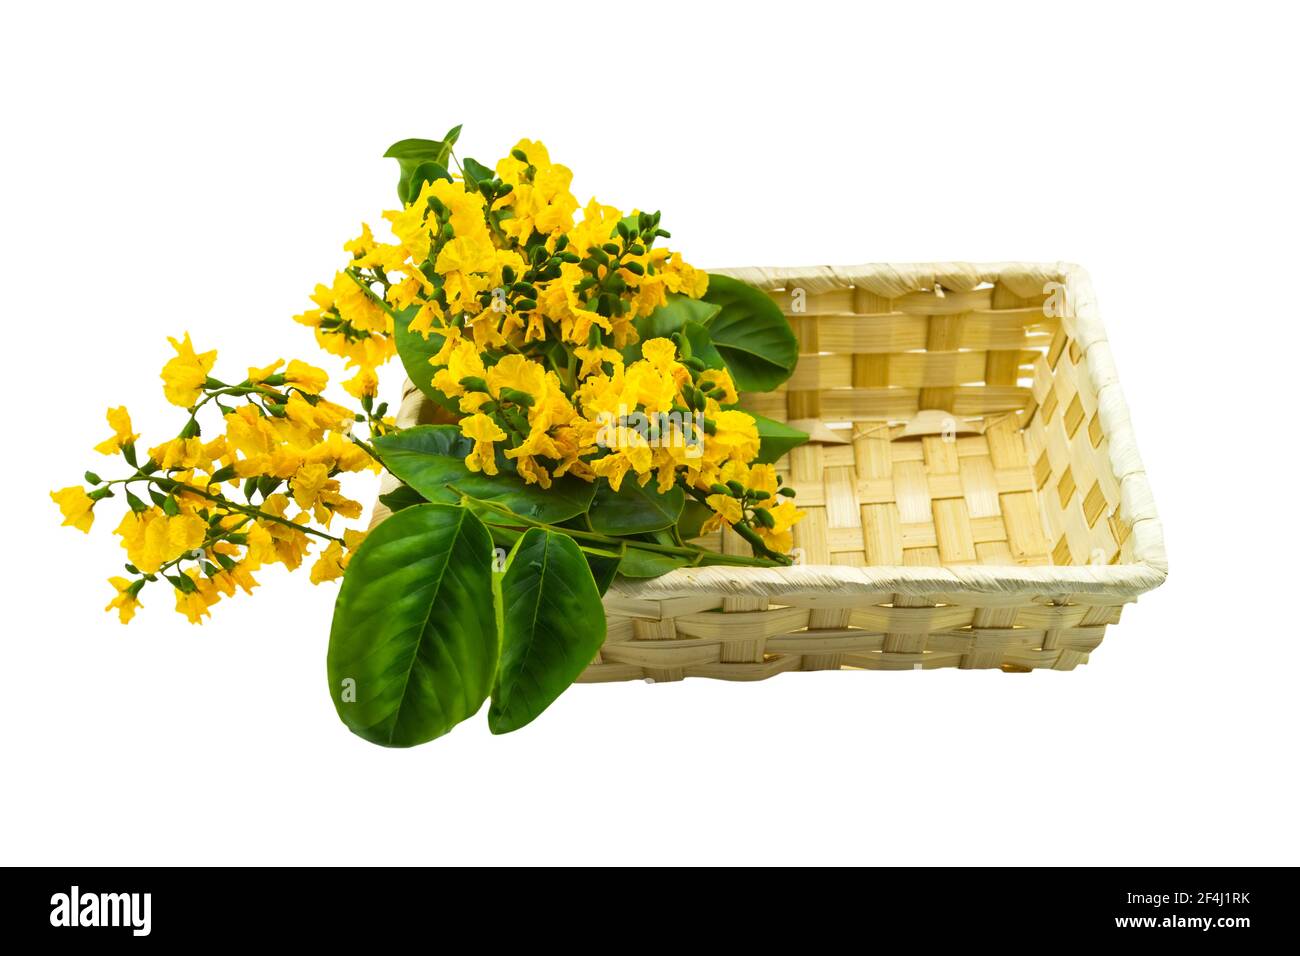 Closed up yellow flower of Burmese Rosewood or Pterocarpus indicus Willd,Burma Padauk and green leaf in basket isolated on white background.Saved with Stock Photo